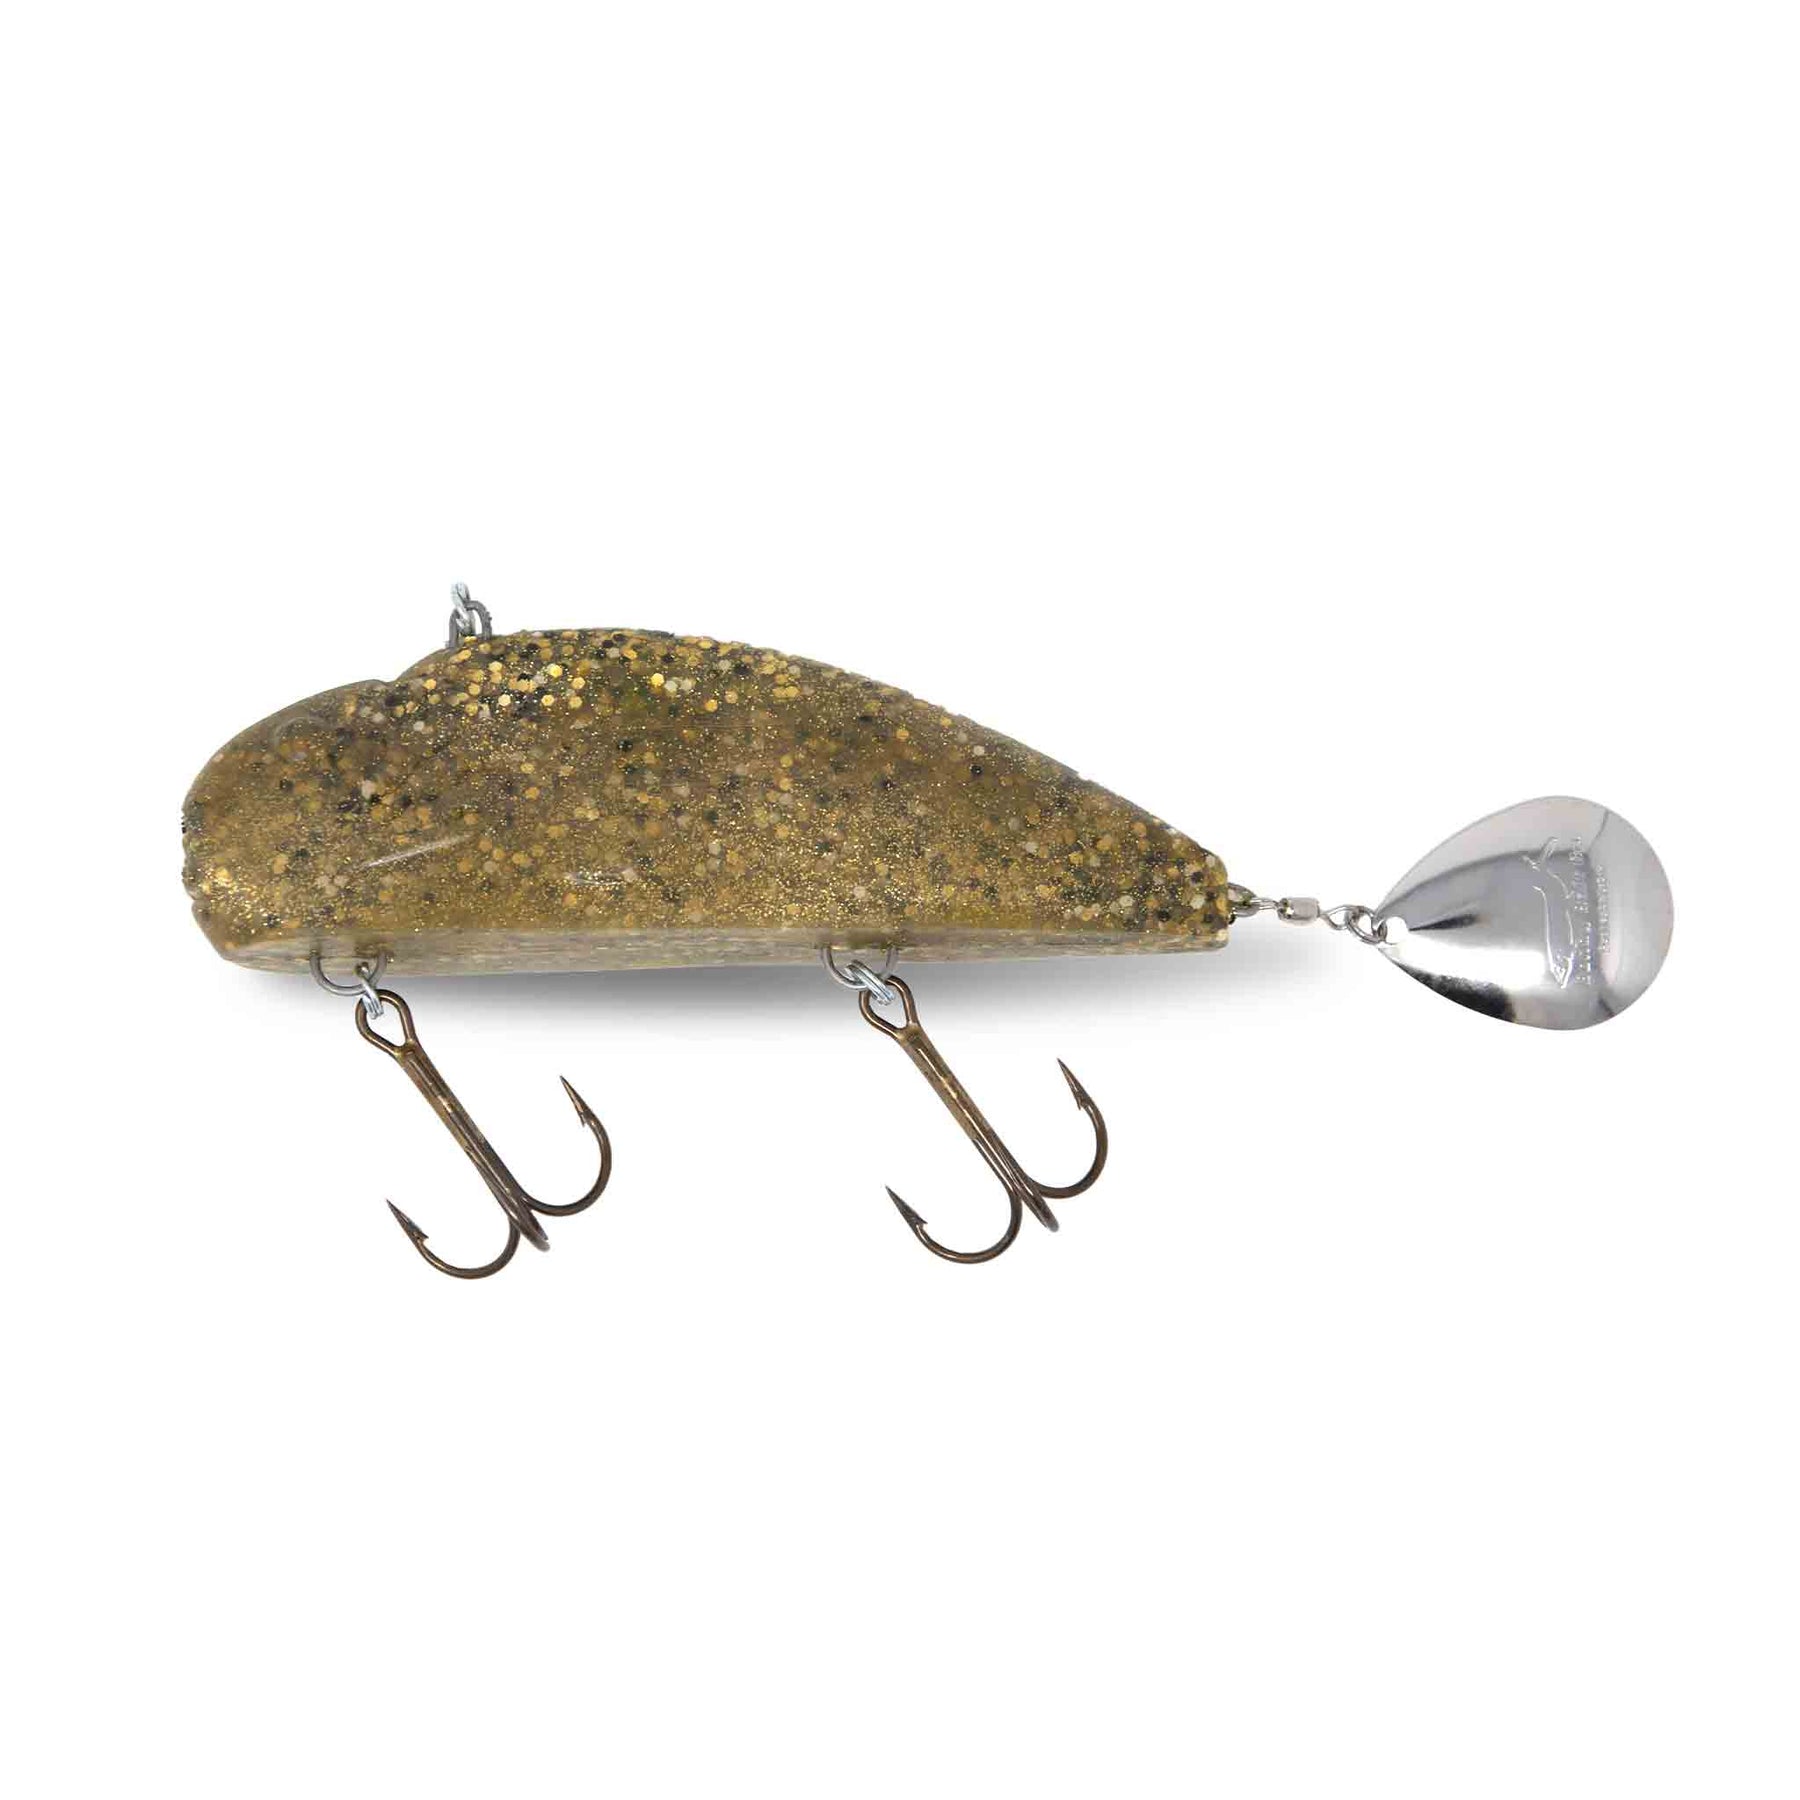 View of Bondy Bait Co. Bondy Bait Junior Walleye available at EZOKO Pike and Musky Shop